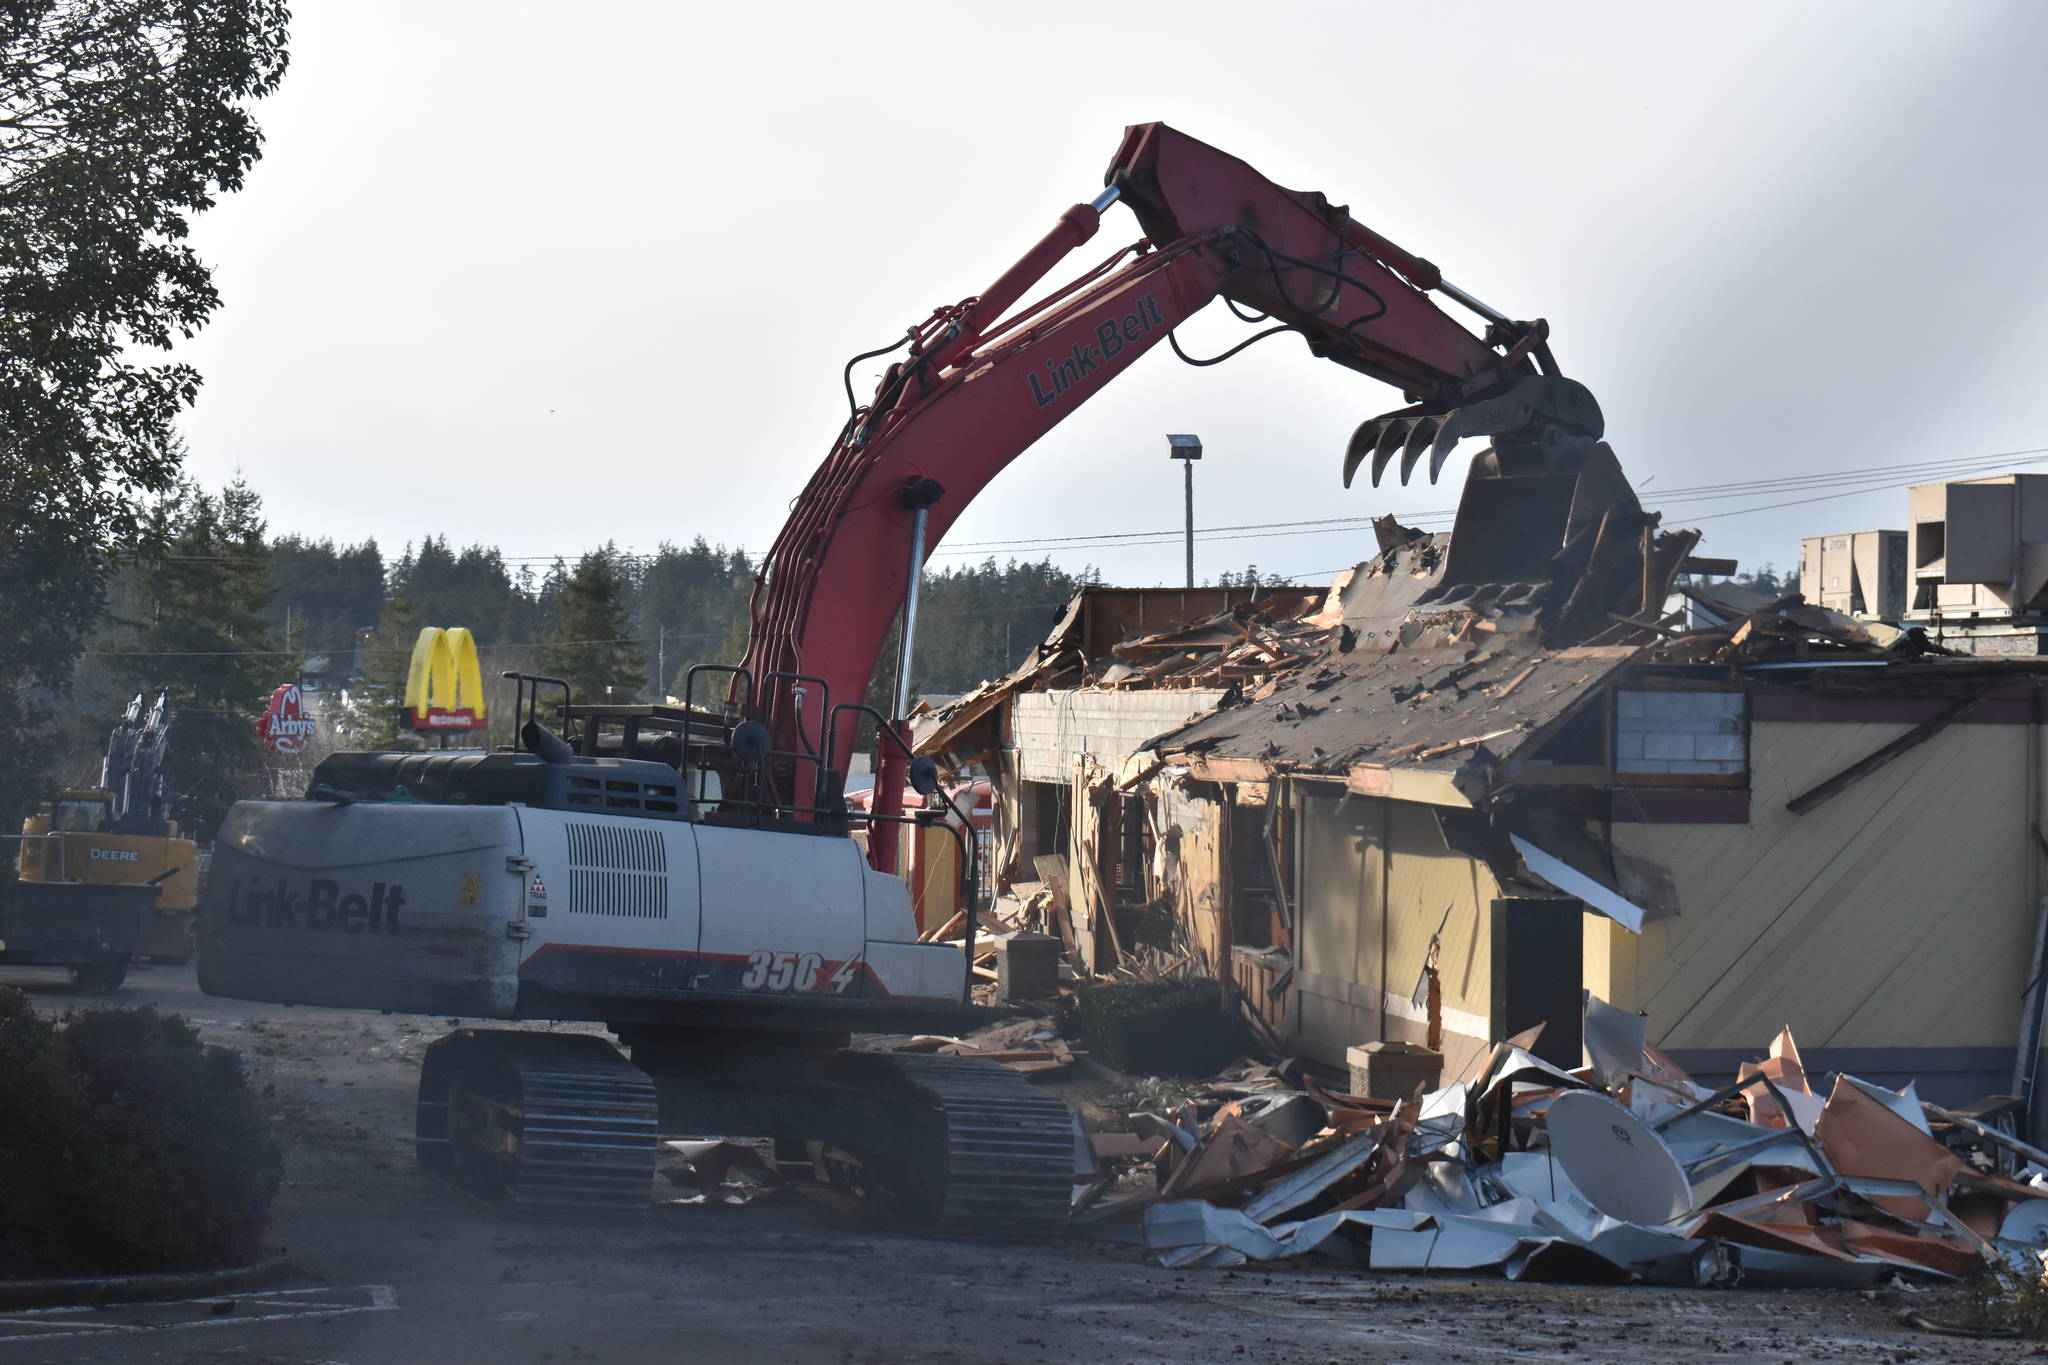 Photo by Emily Gilbert/Whidbey News-Times An excavator demolishes the Oak Harbor McDonald’s on Feb. 17. The madrona tree on the left side will be taken down to make way for the new building, although one woman tried to save it.